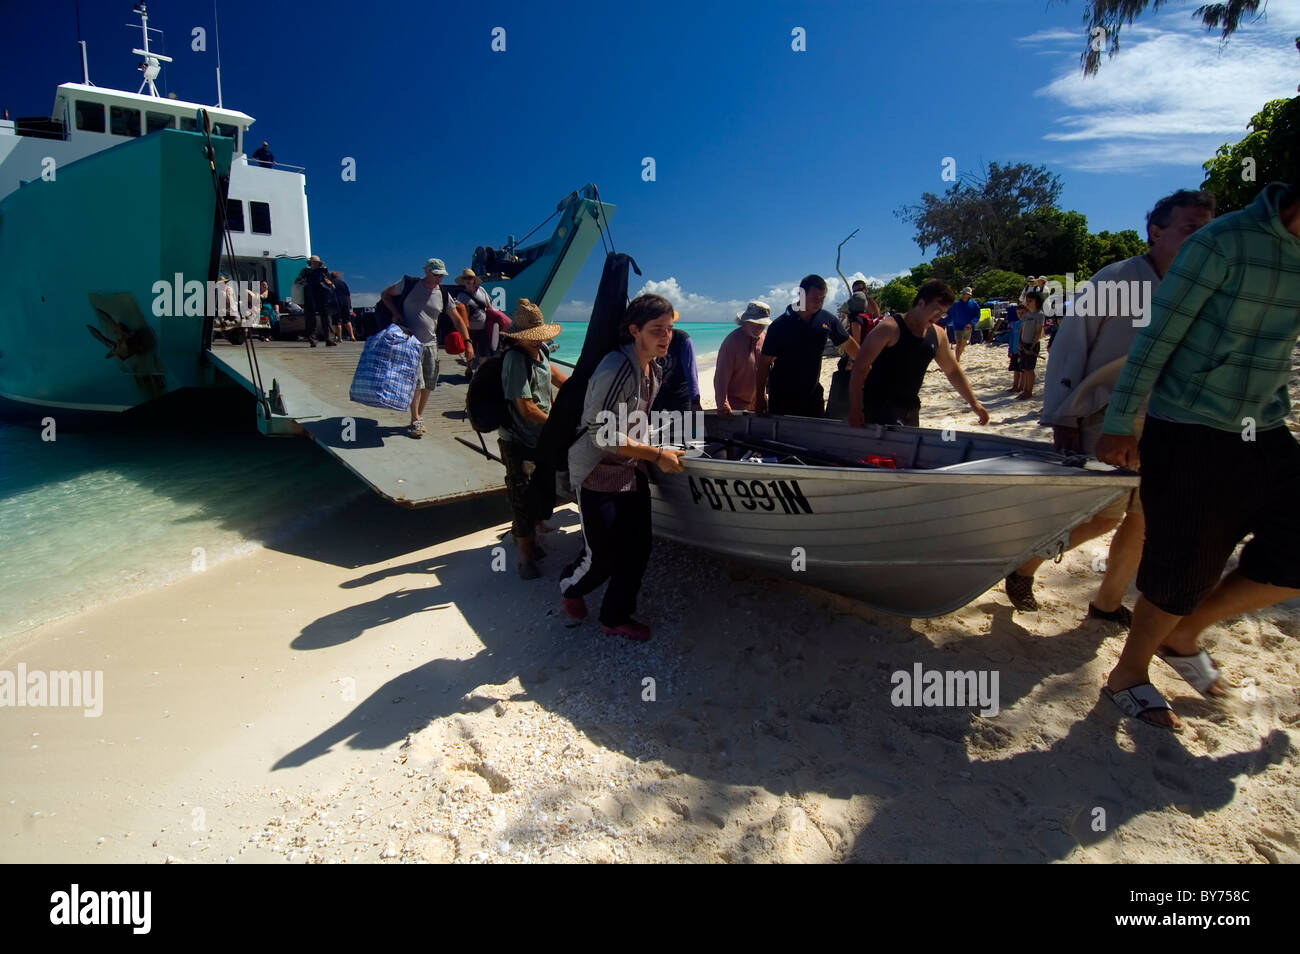 Resupply barge beached on North West Island, Capricorn Bunker Group, southern Great Barrier Reef Marine Park, Australia Stock Photo